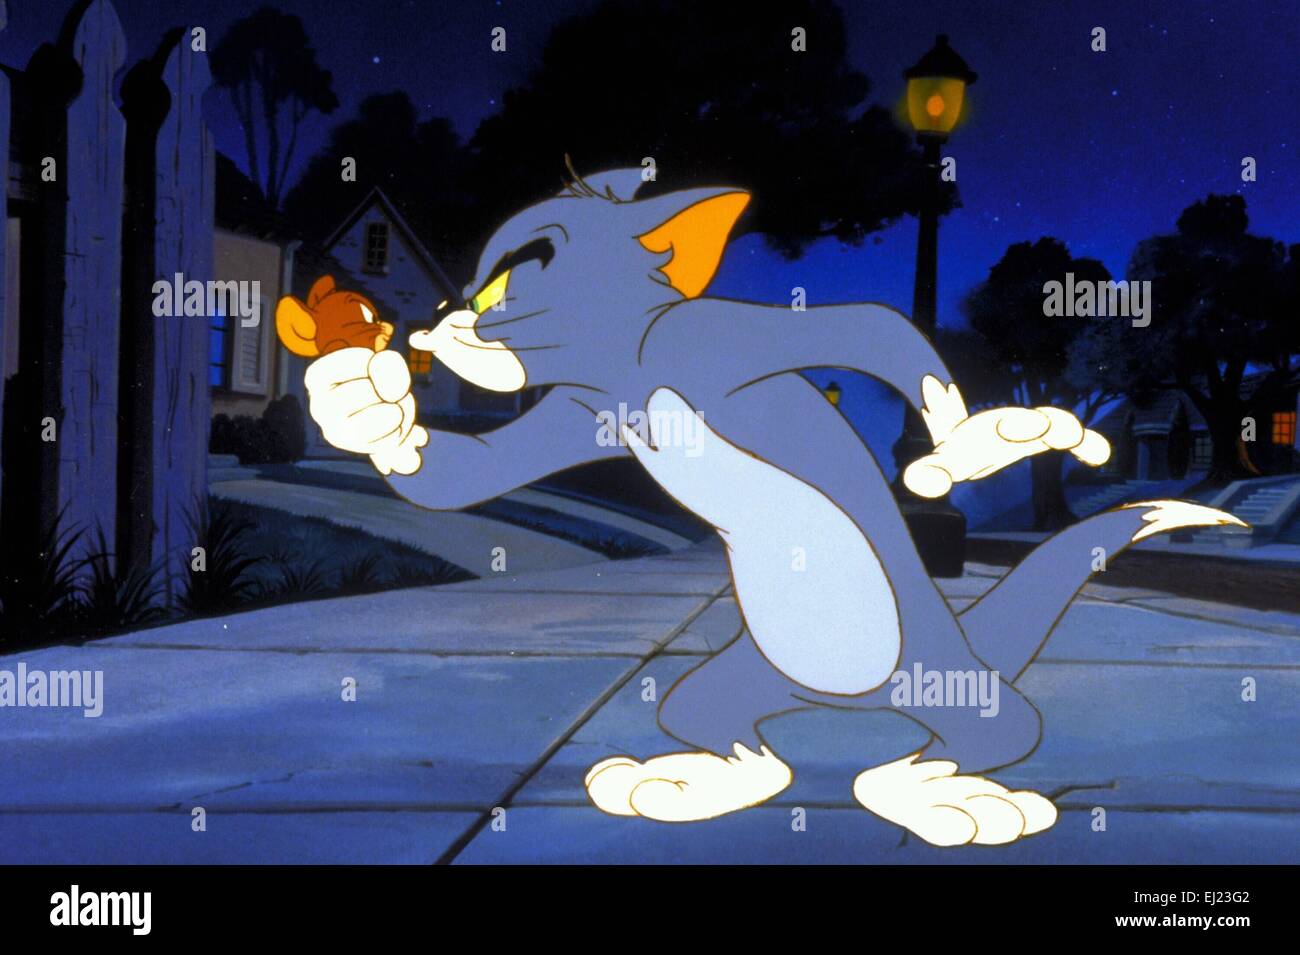 TOM AND JERRY (2021), directed by TIM STORY. Credit: WARNER BROS. ANIMATION  / Album Stock Photo - Alamy